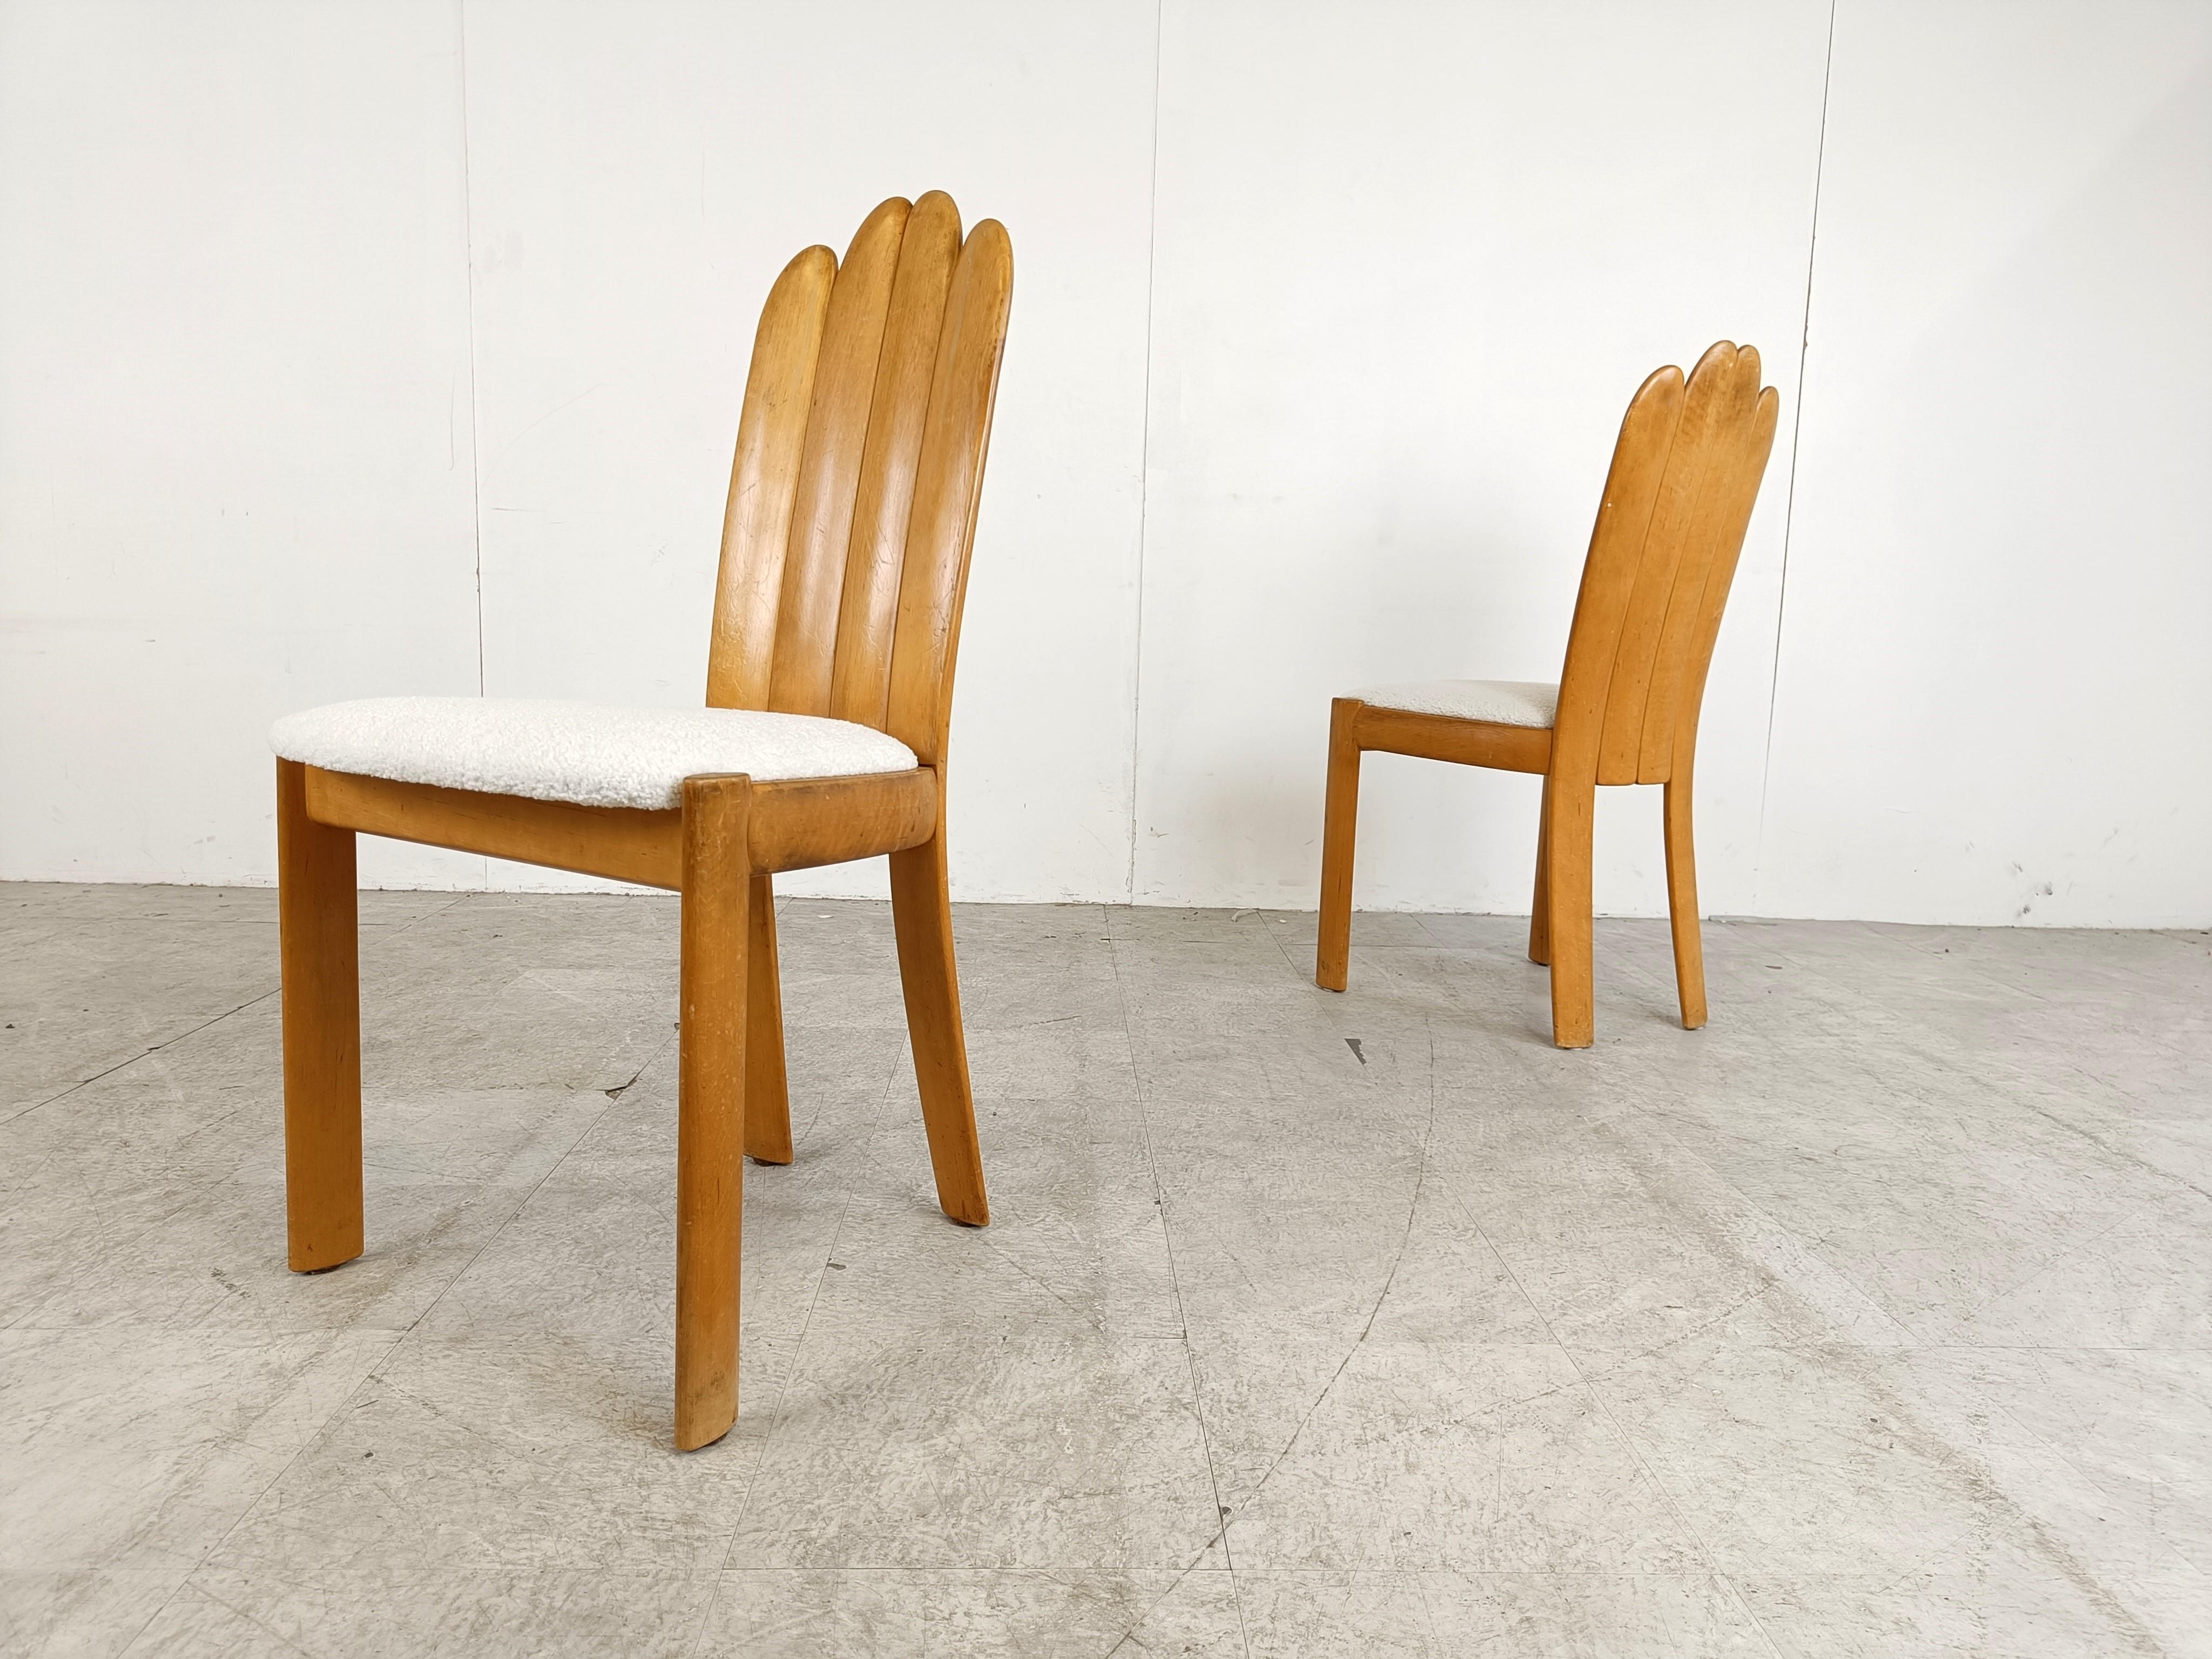 Set of 4 scandinavian dining chairs by Vamdrup Stolefabrik, 1960s For Sale 4